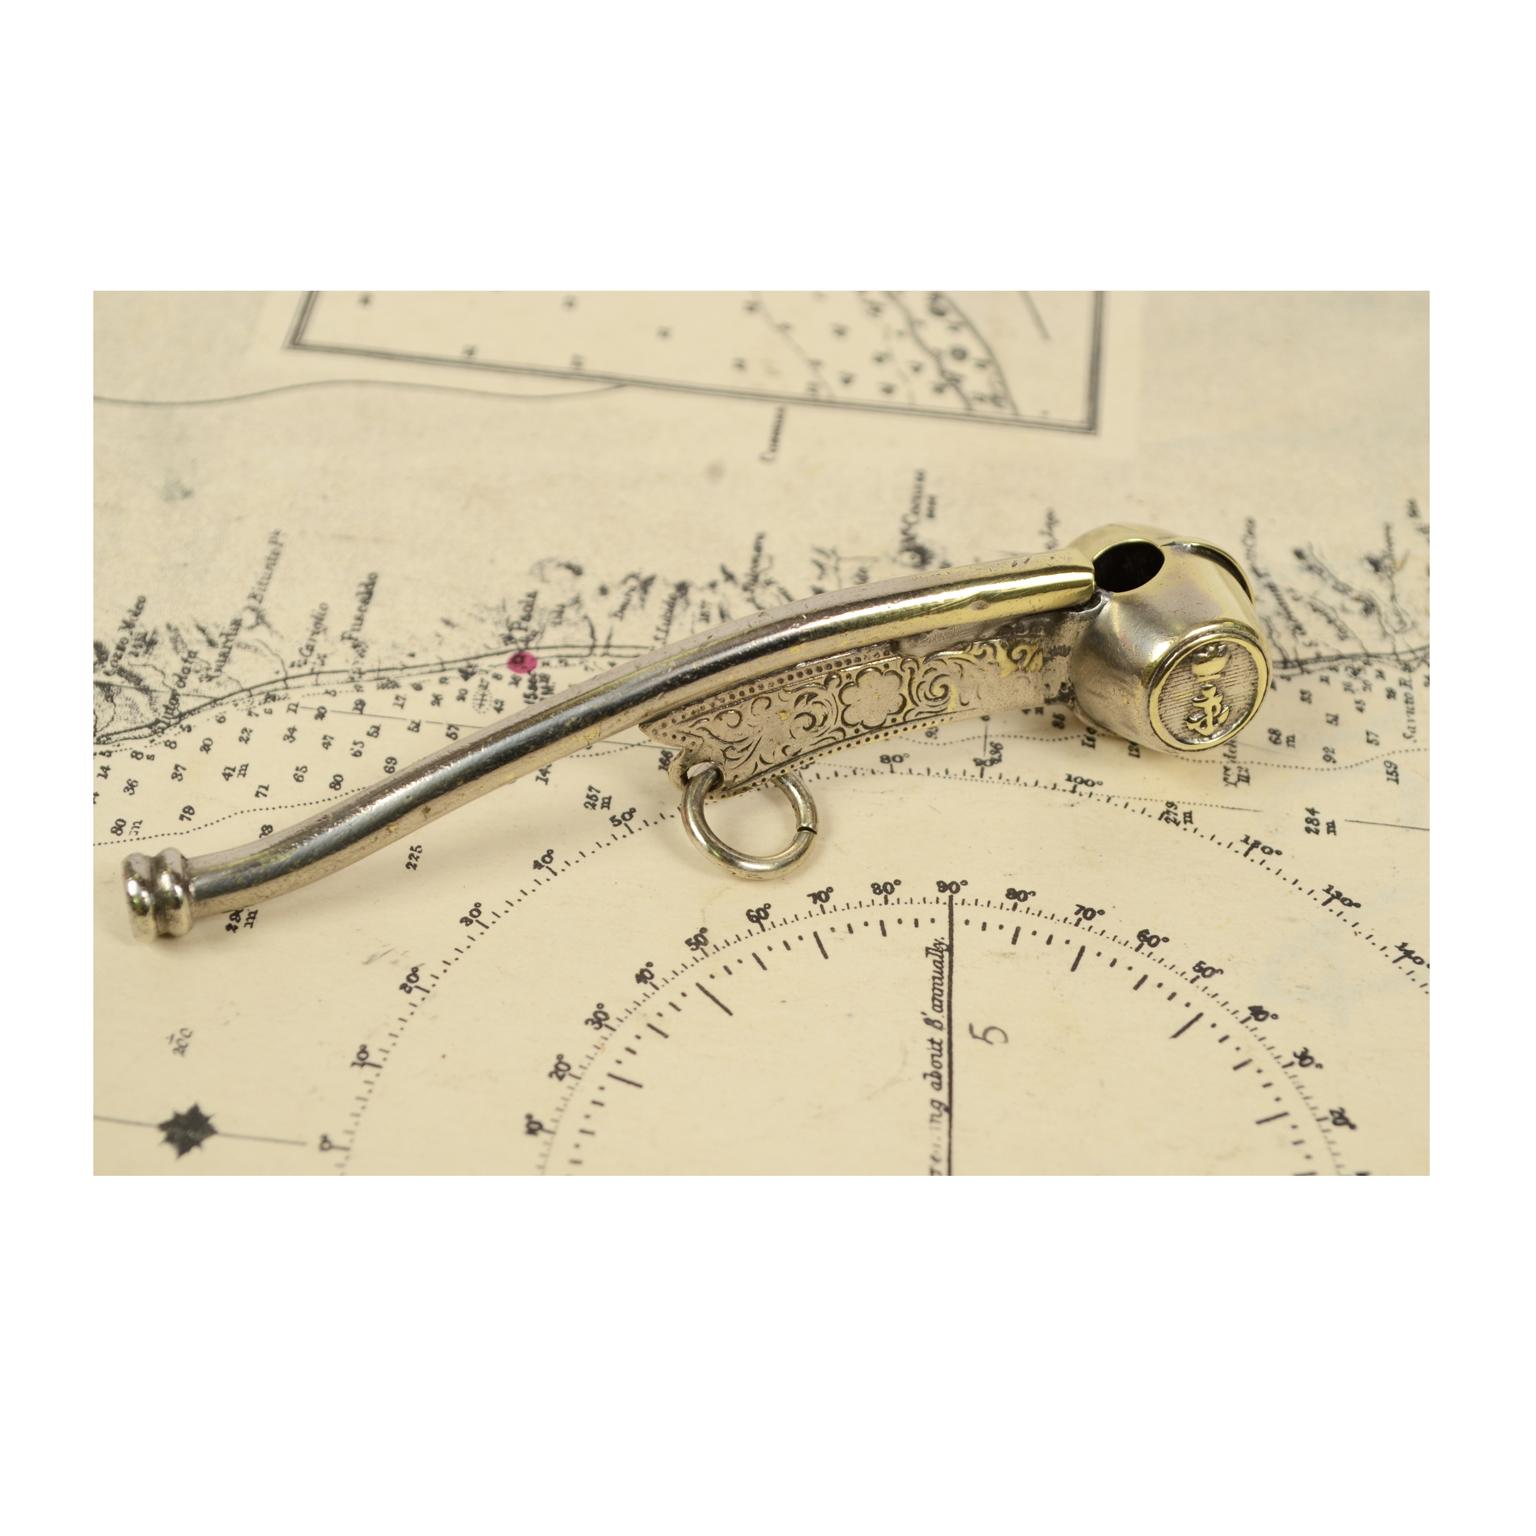 Boatswain whistle of chromed brass, English manufacture, early 1900s, still surmounted by a crown on the sides. Measures: Length 10.5 cm, width 2 cm, height 2 cm. Good condition, tin soldering signs.
  